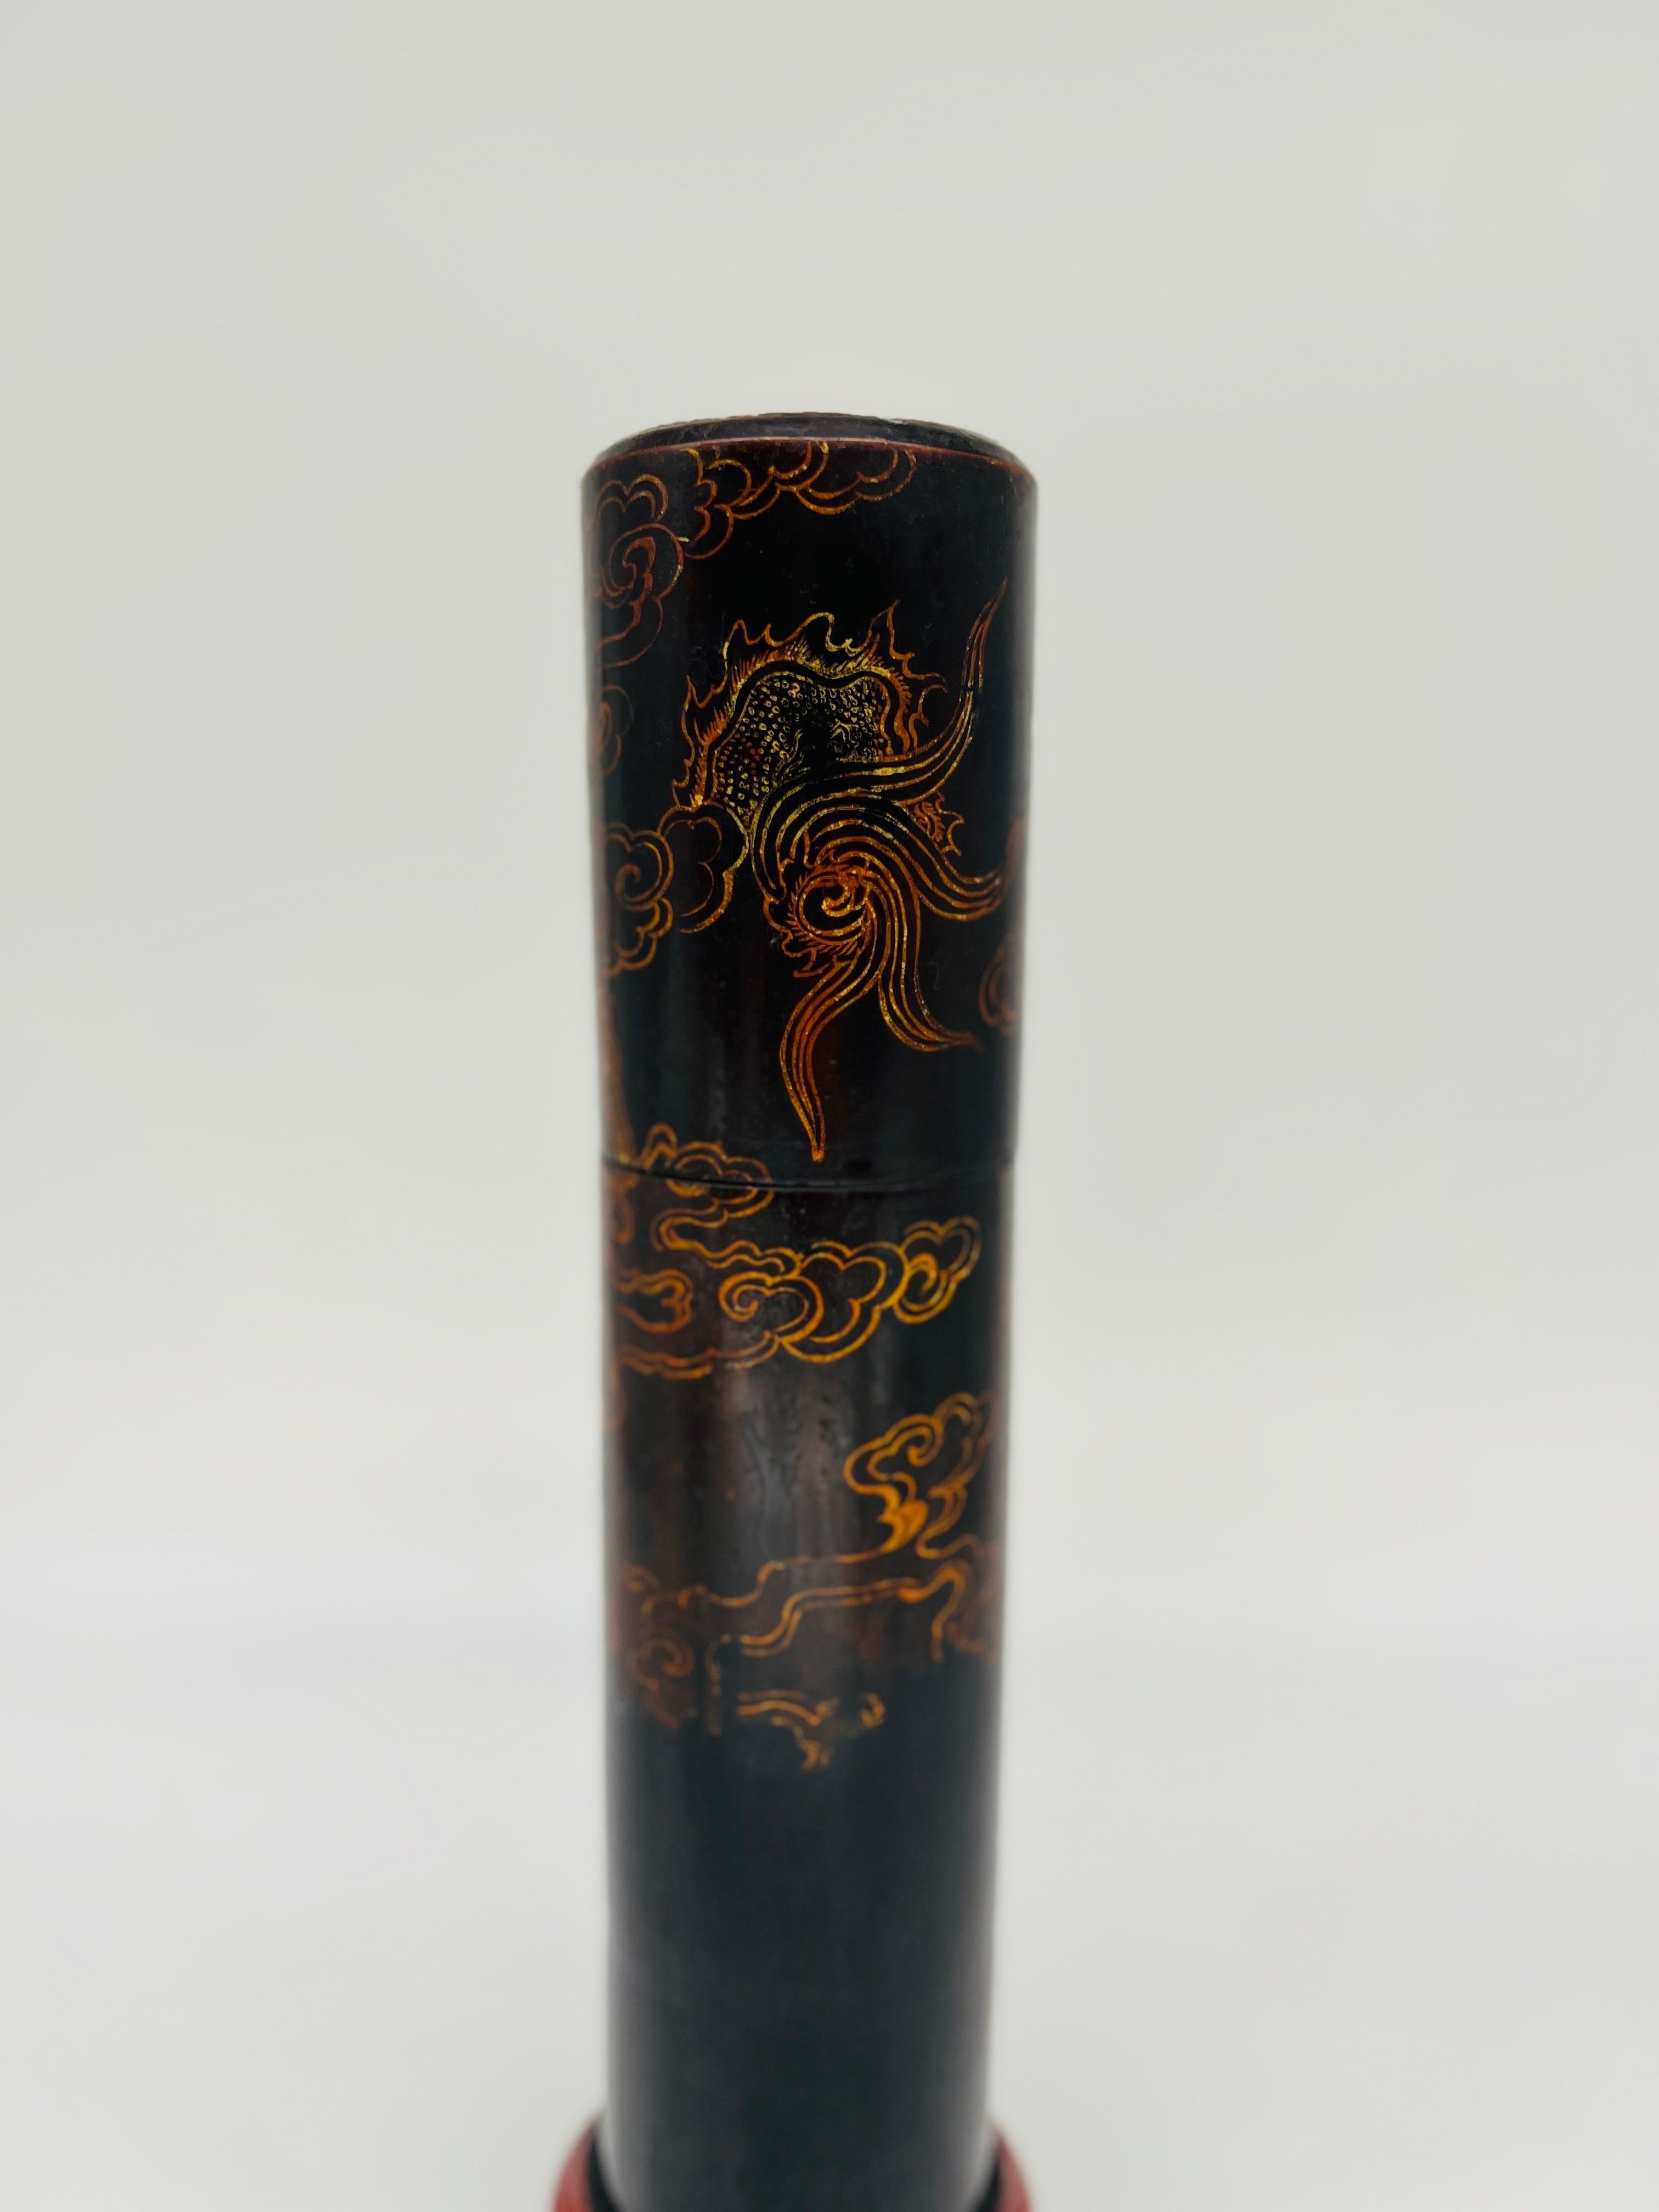 Wood Vintage Japanese Lacquerware Cylindrical Fireplace Matchstrike Box For Sale